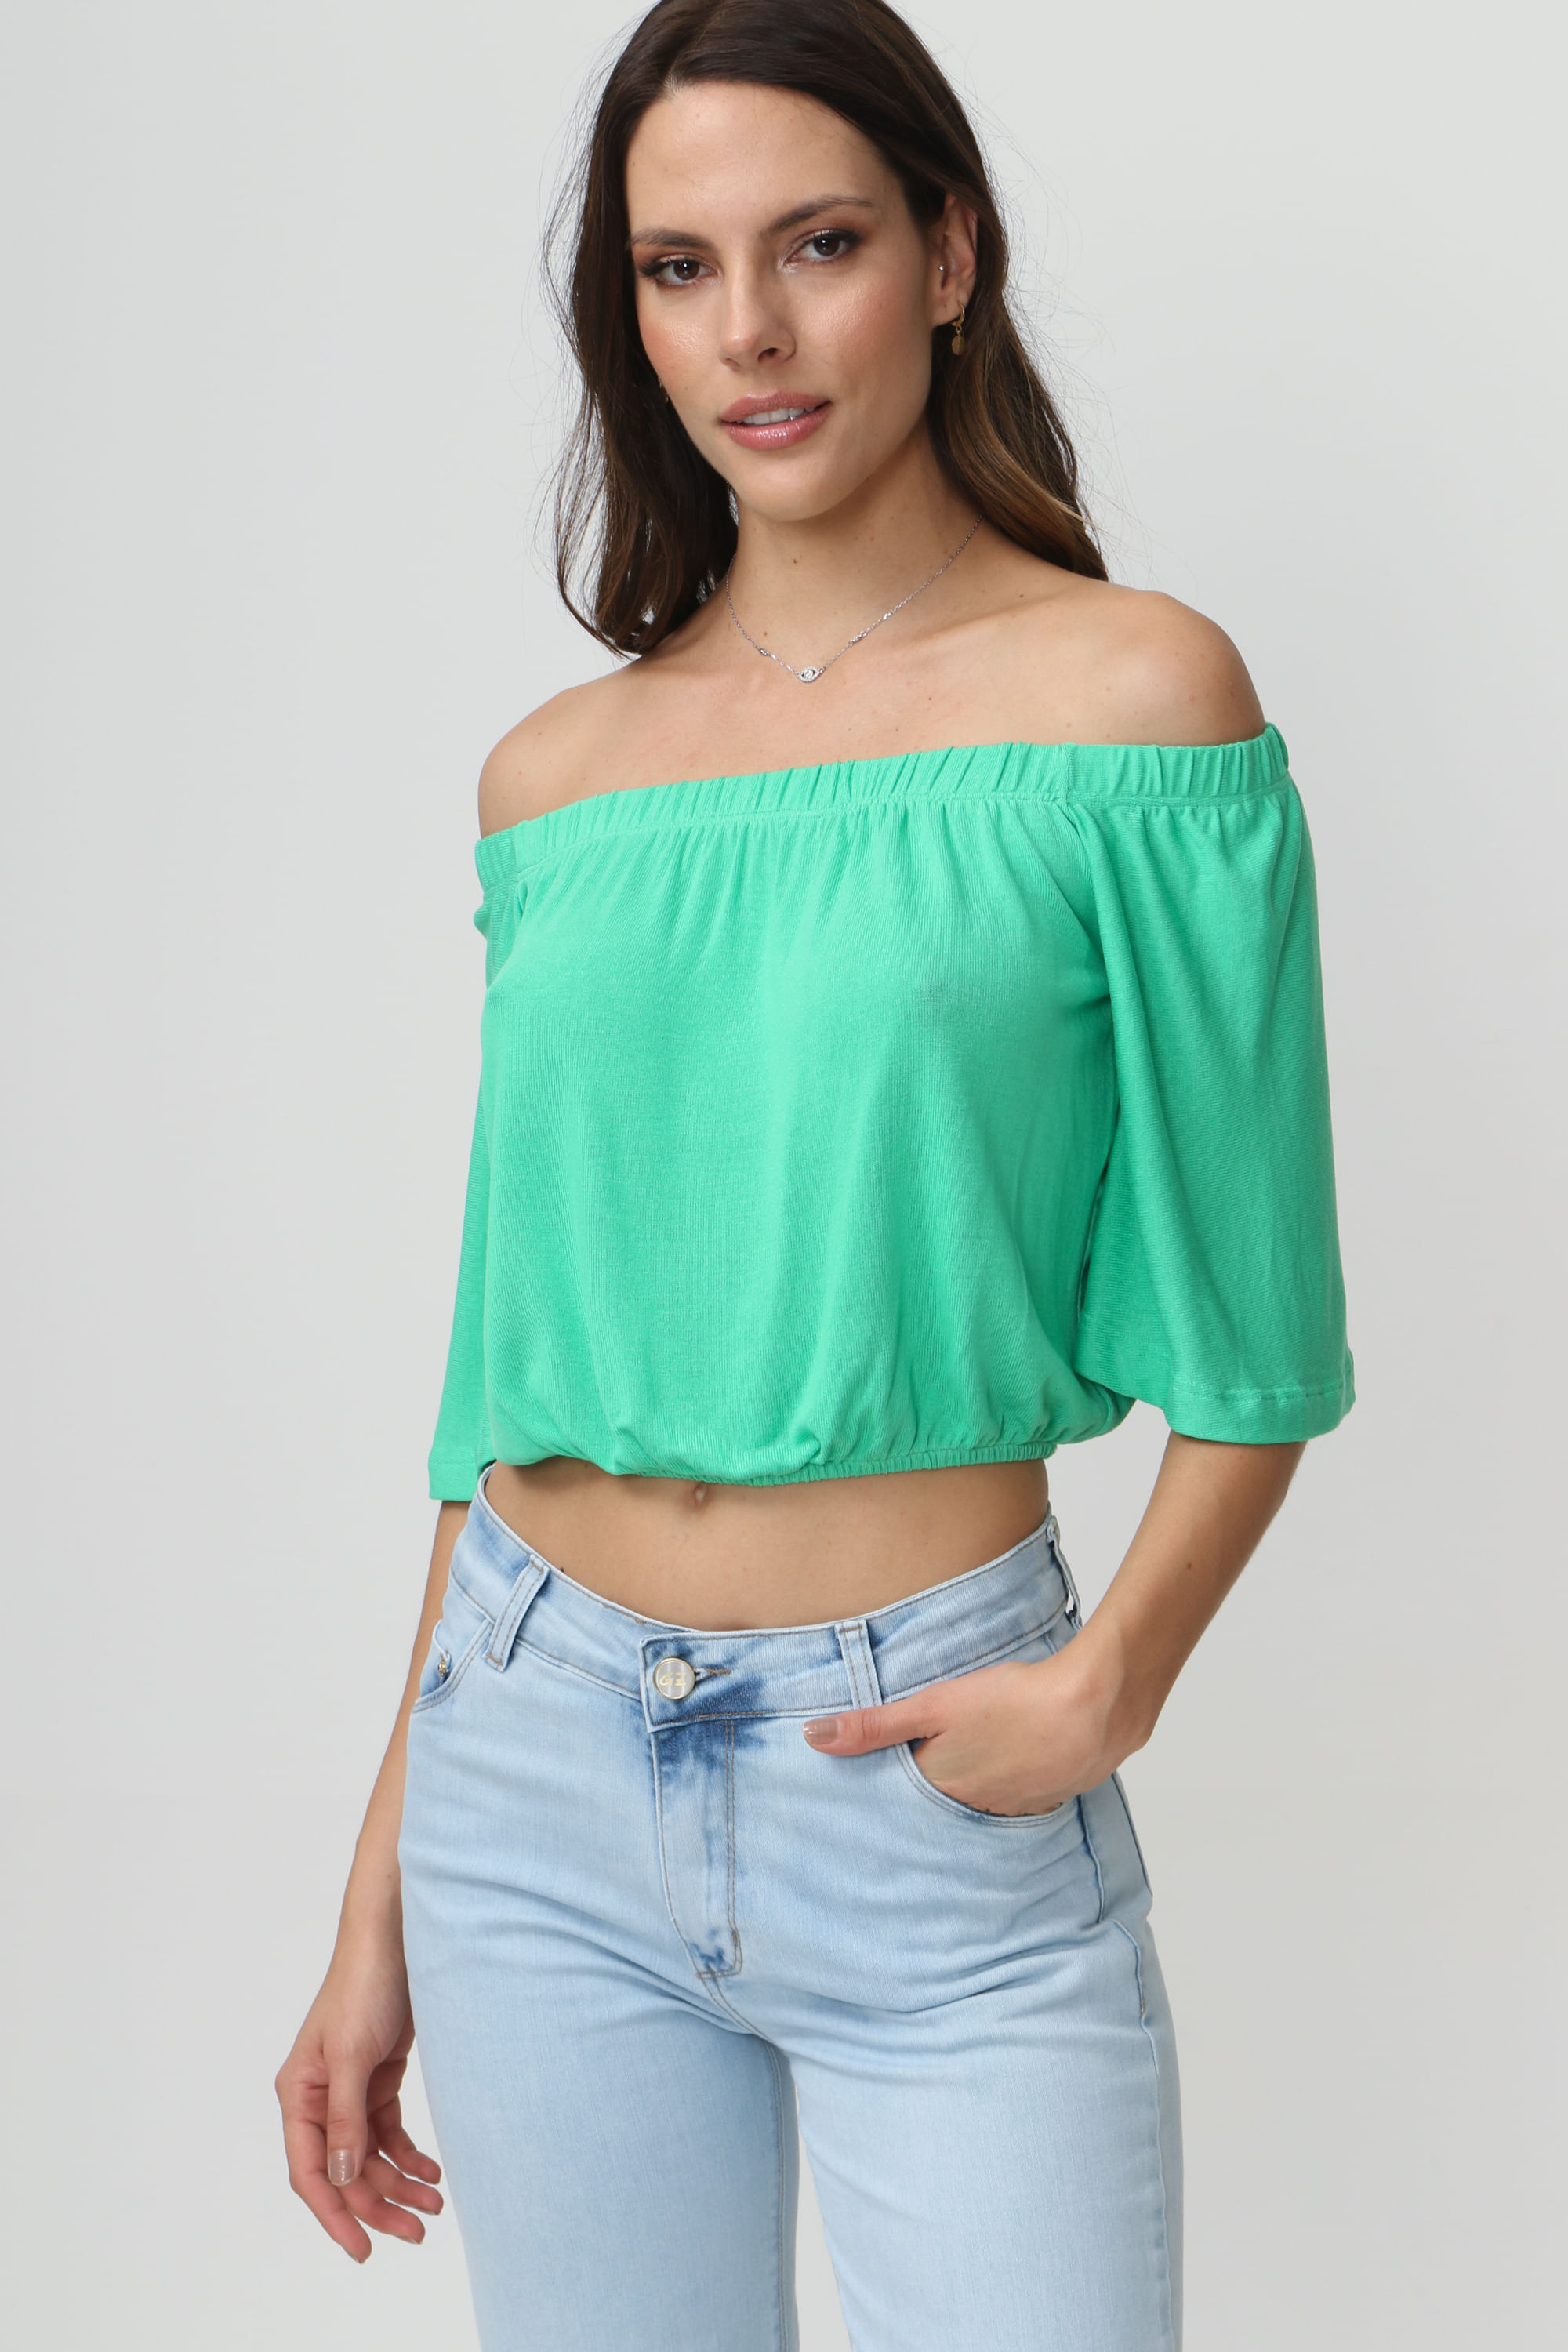 cropped-77840